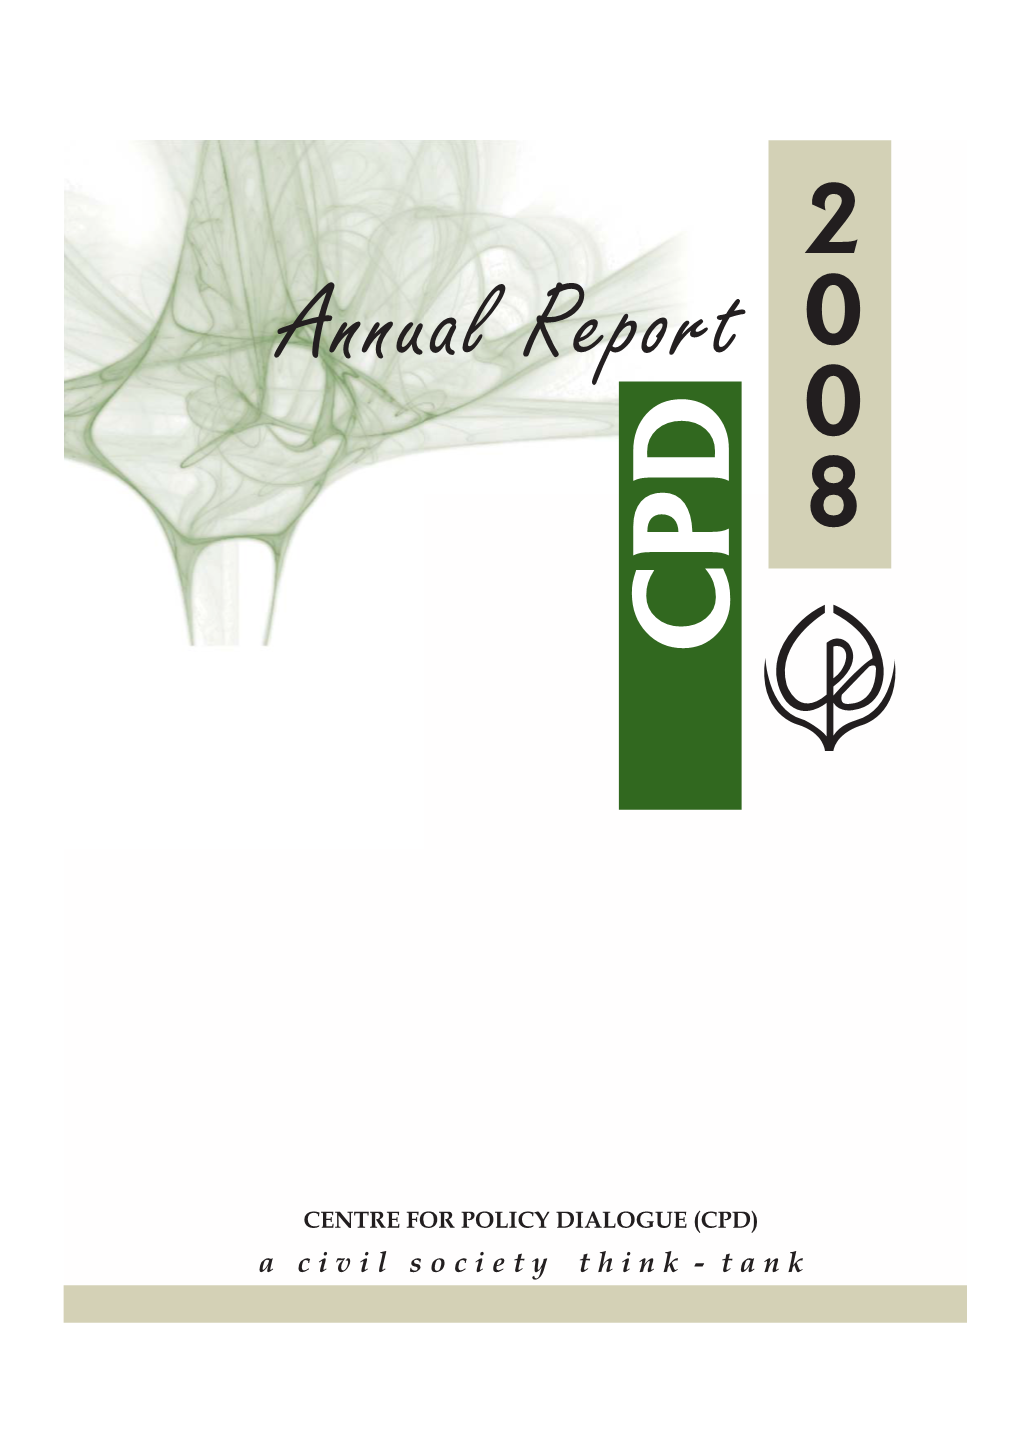 Annual Report 0 0 8 CPD